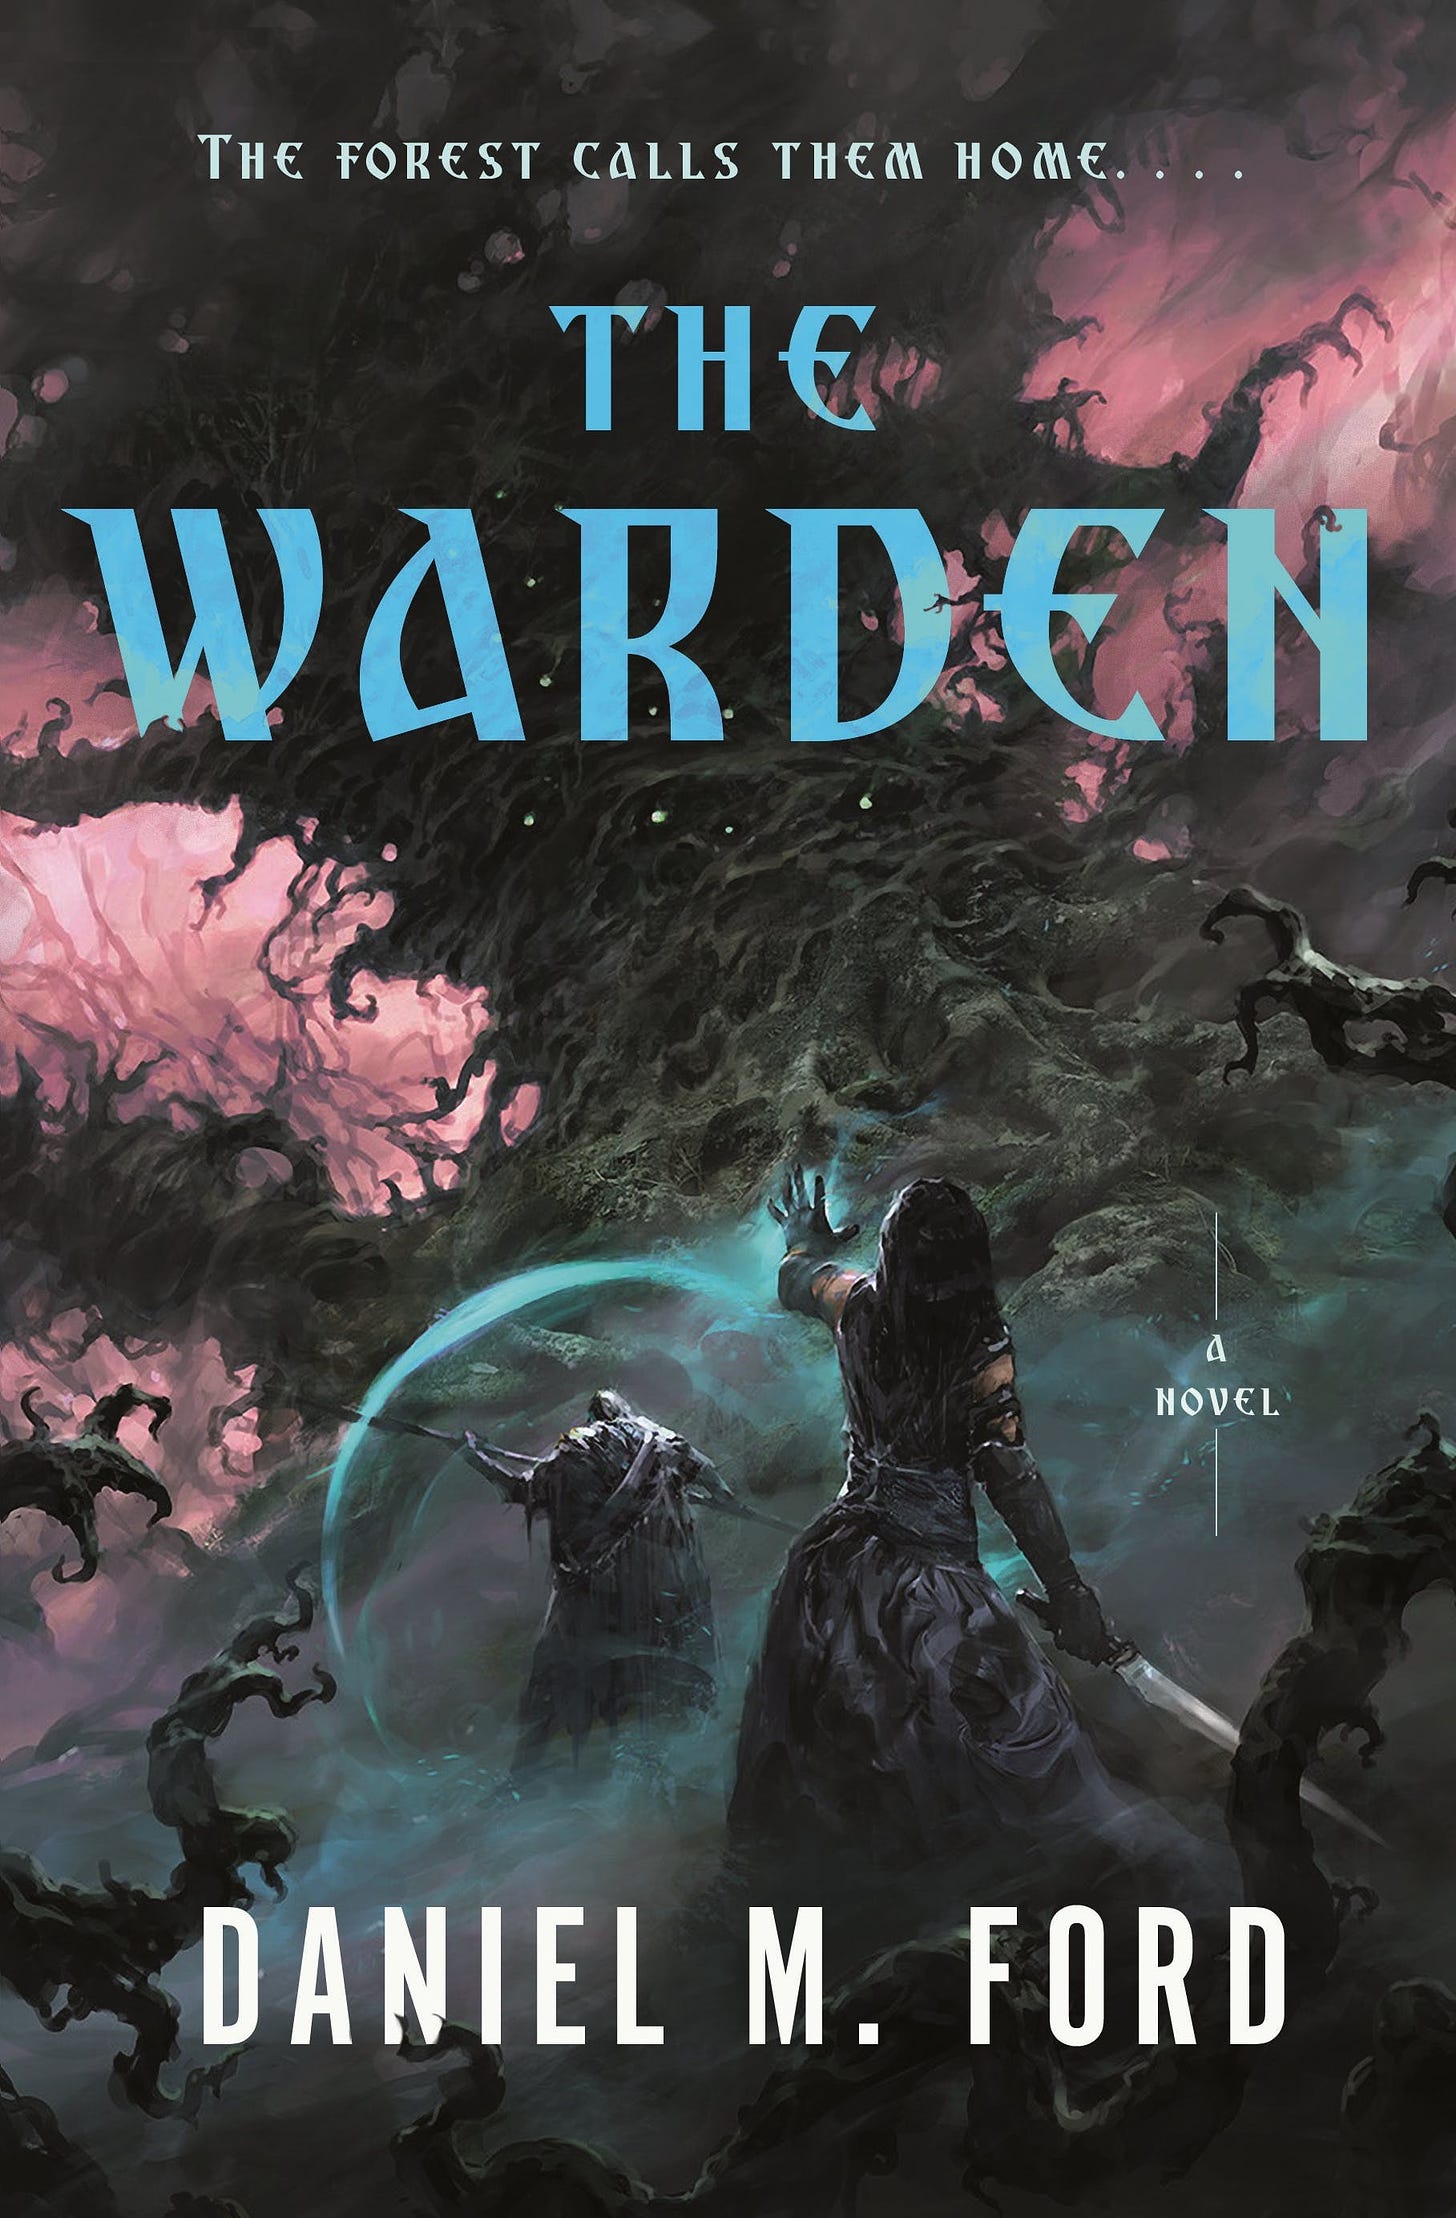 Cover art for Daniel M. Ford's The Warden